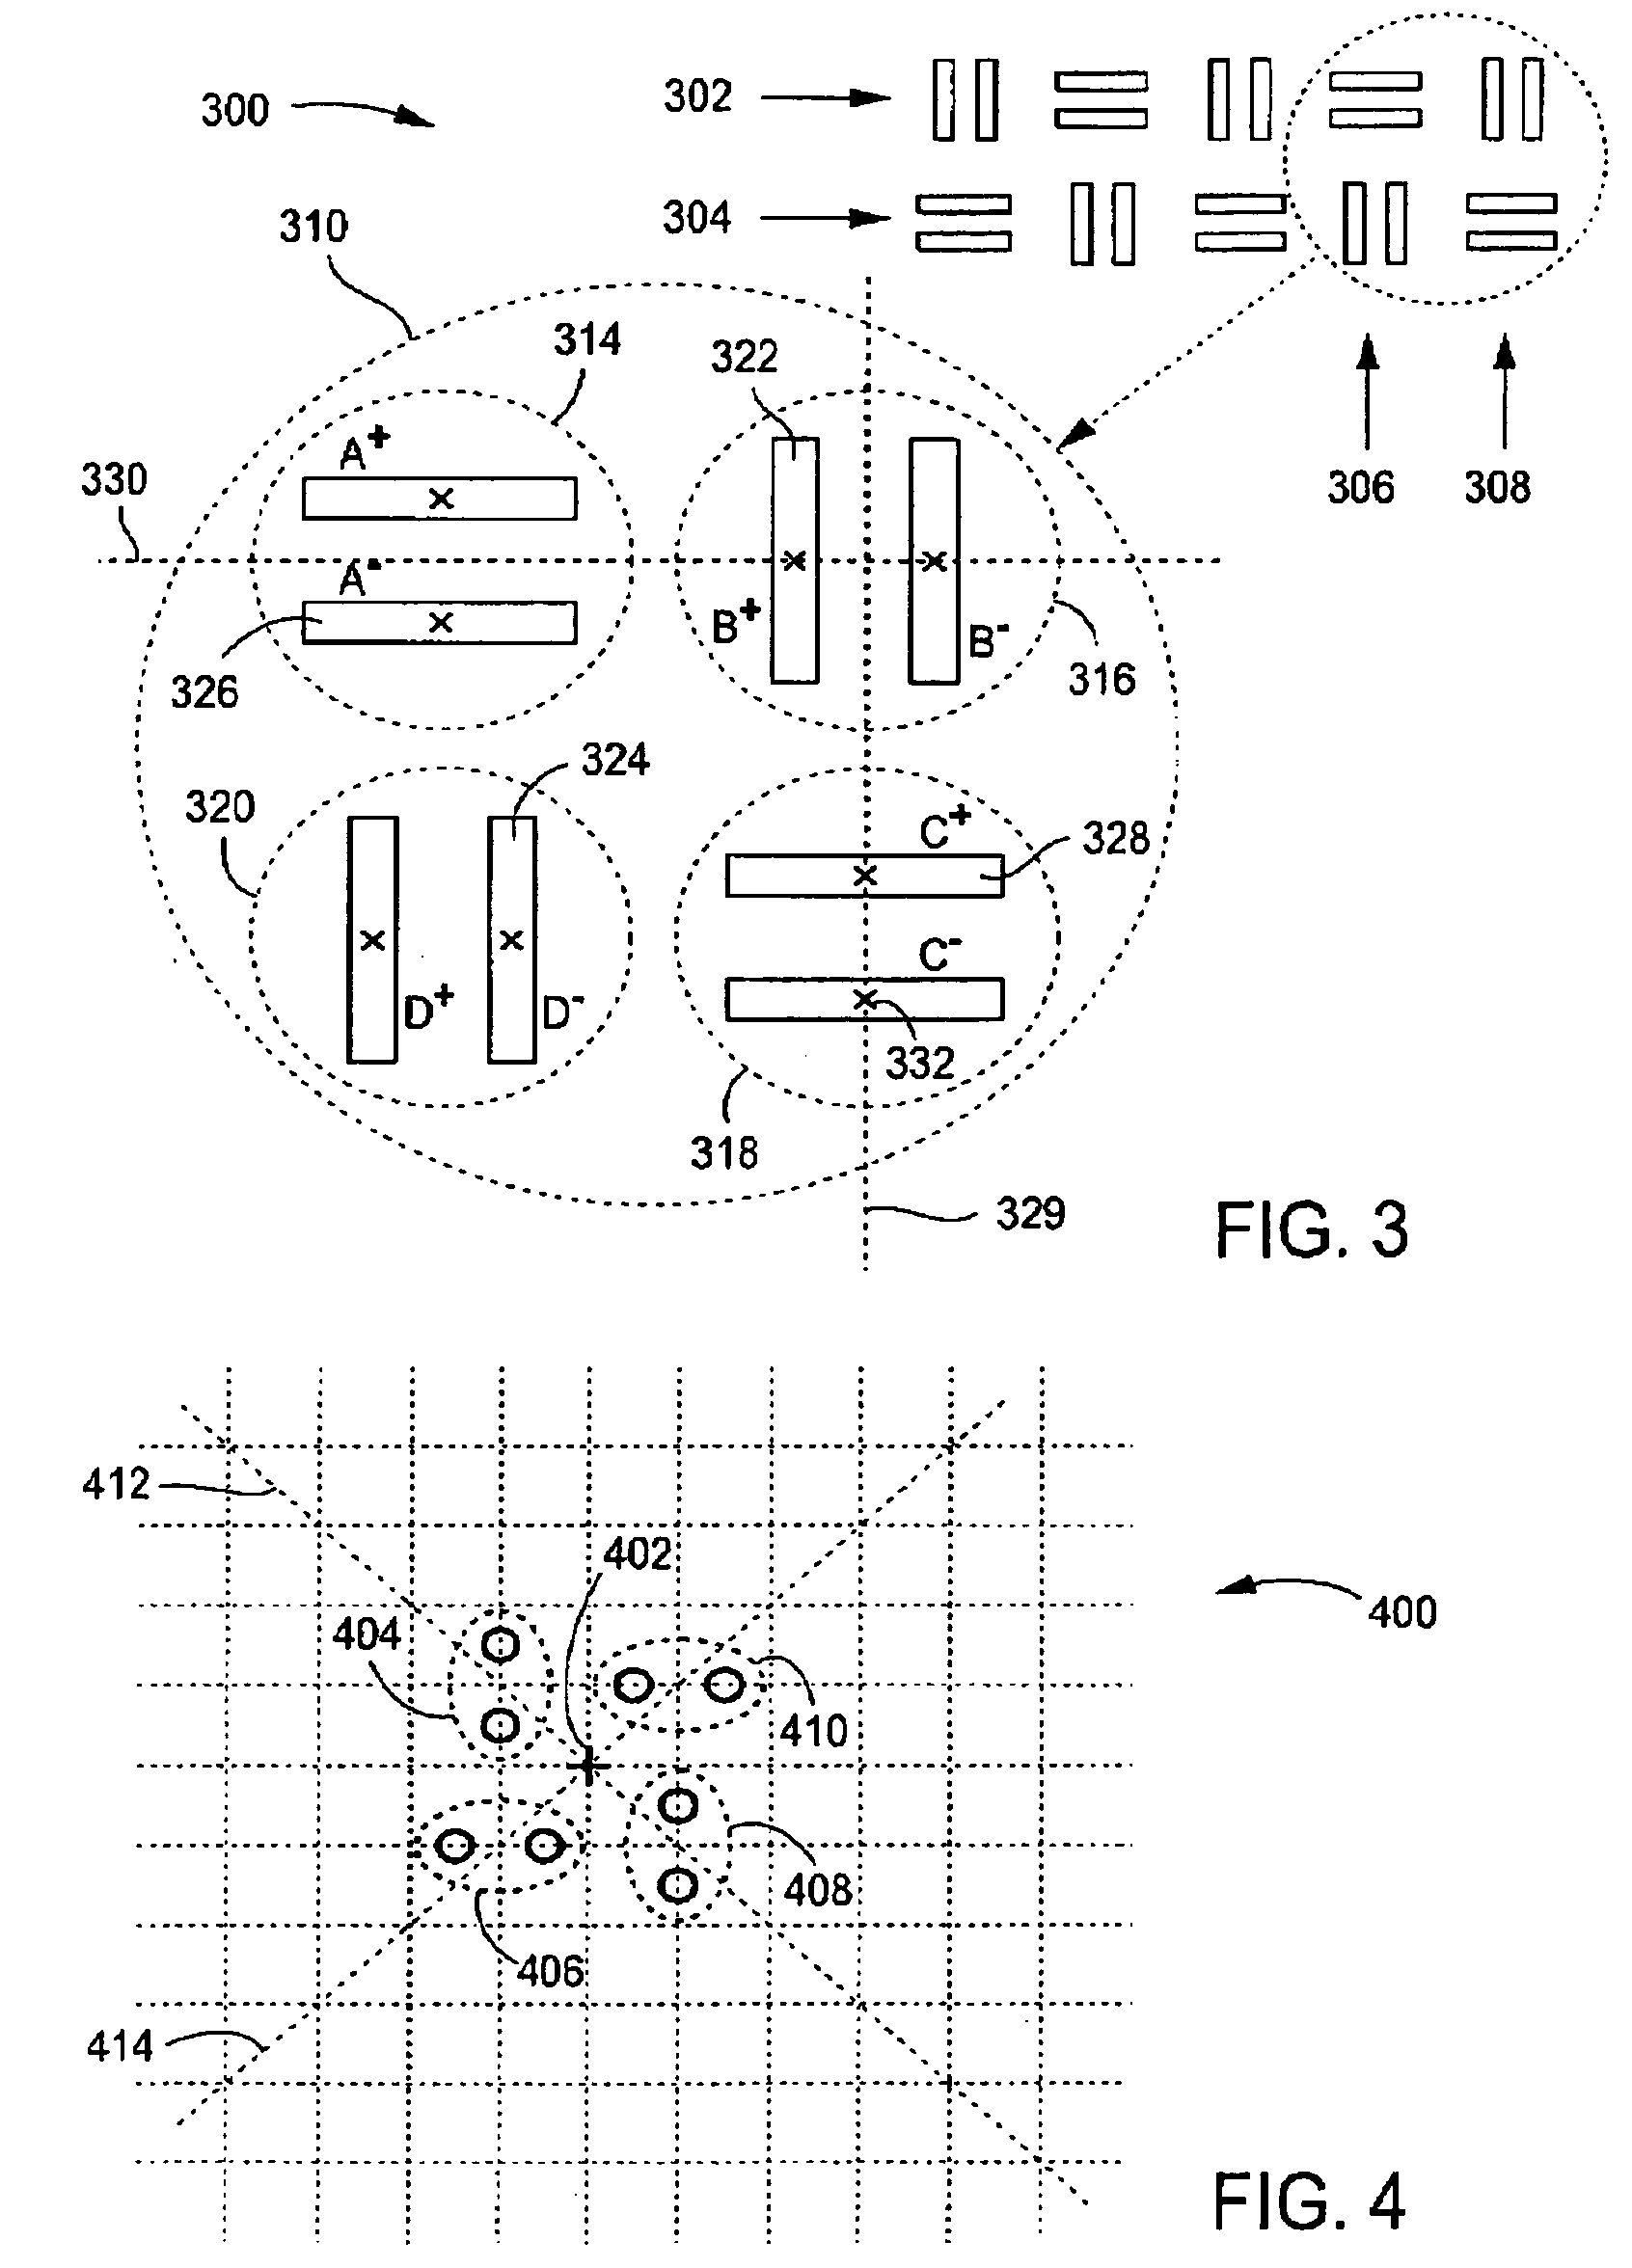 Noise canceling differential connector and footprint